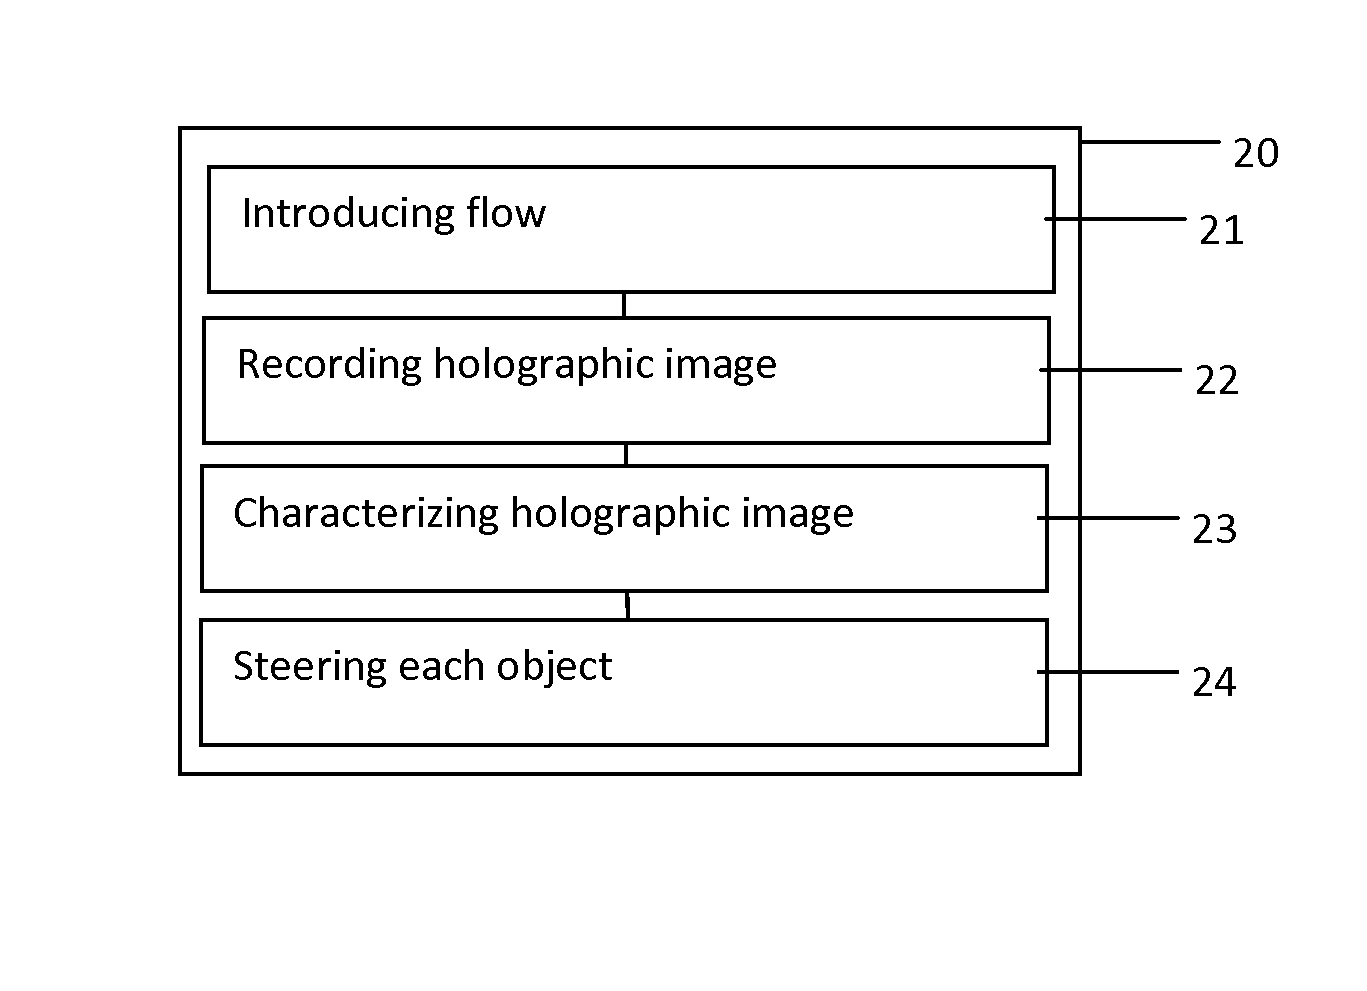 Analysis and sorting of objects in flow